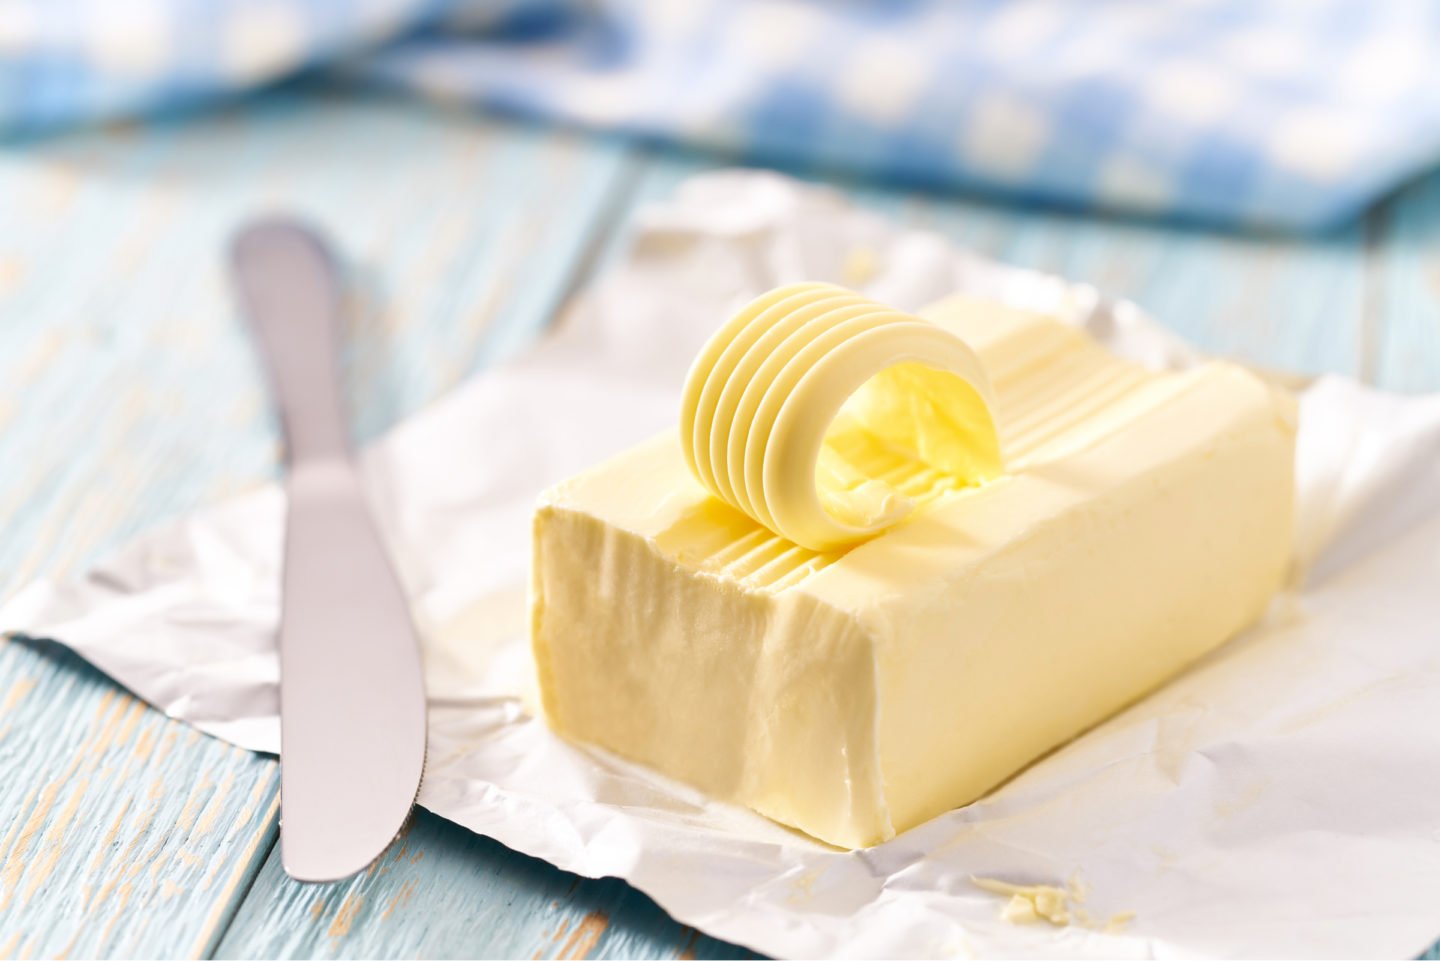 butter is also a good coconut oil substitute